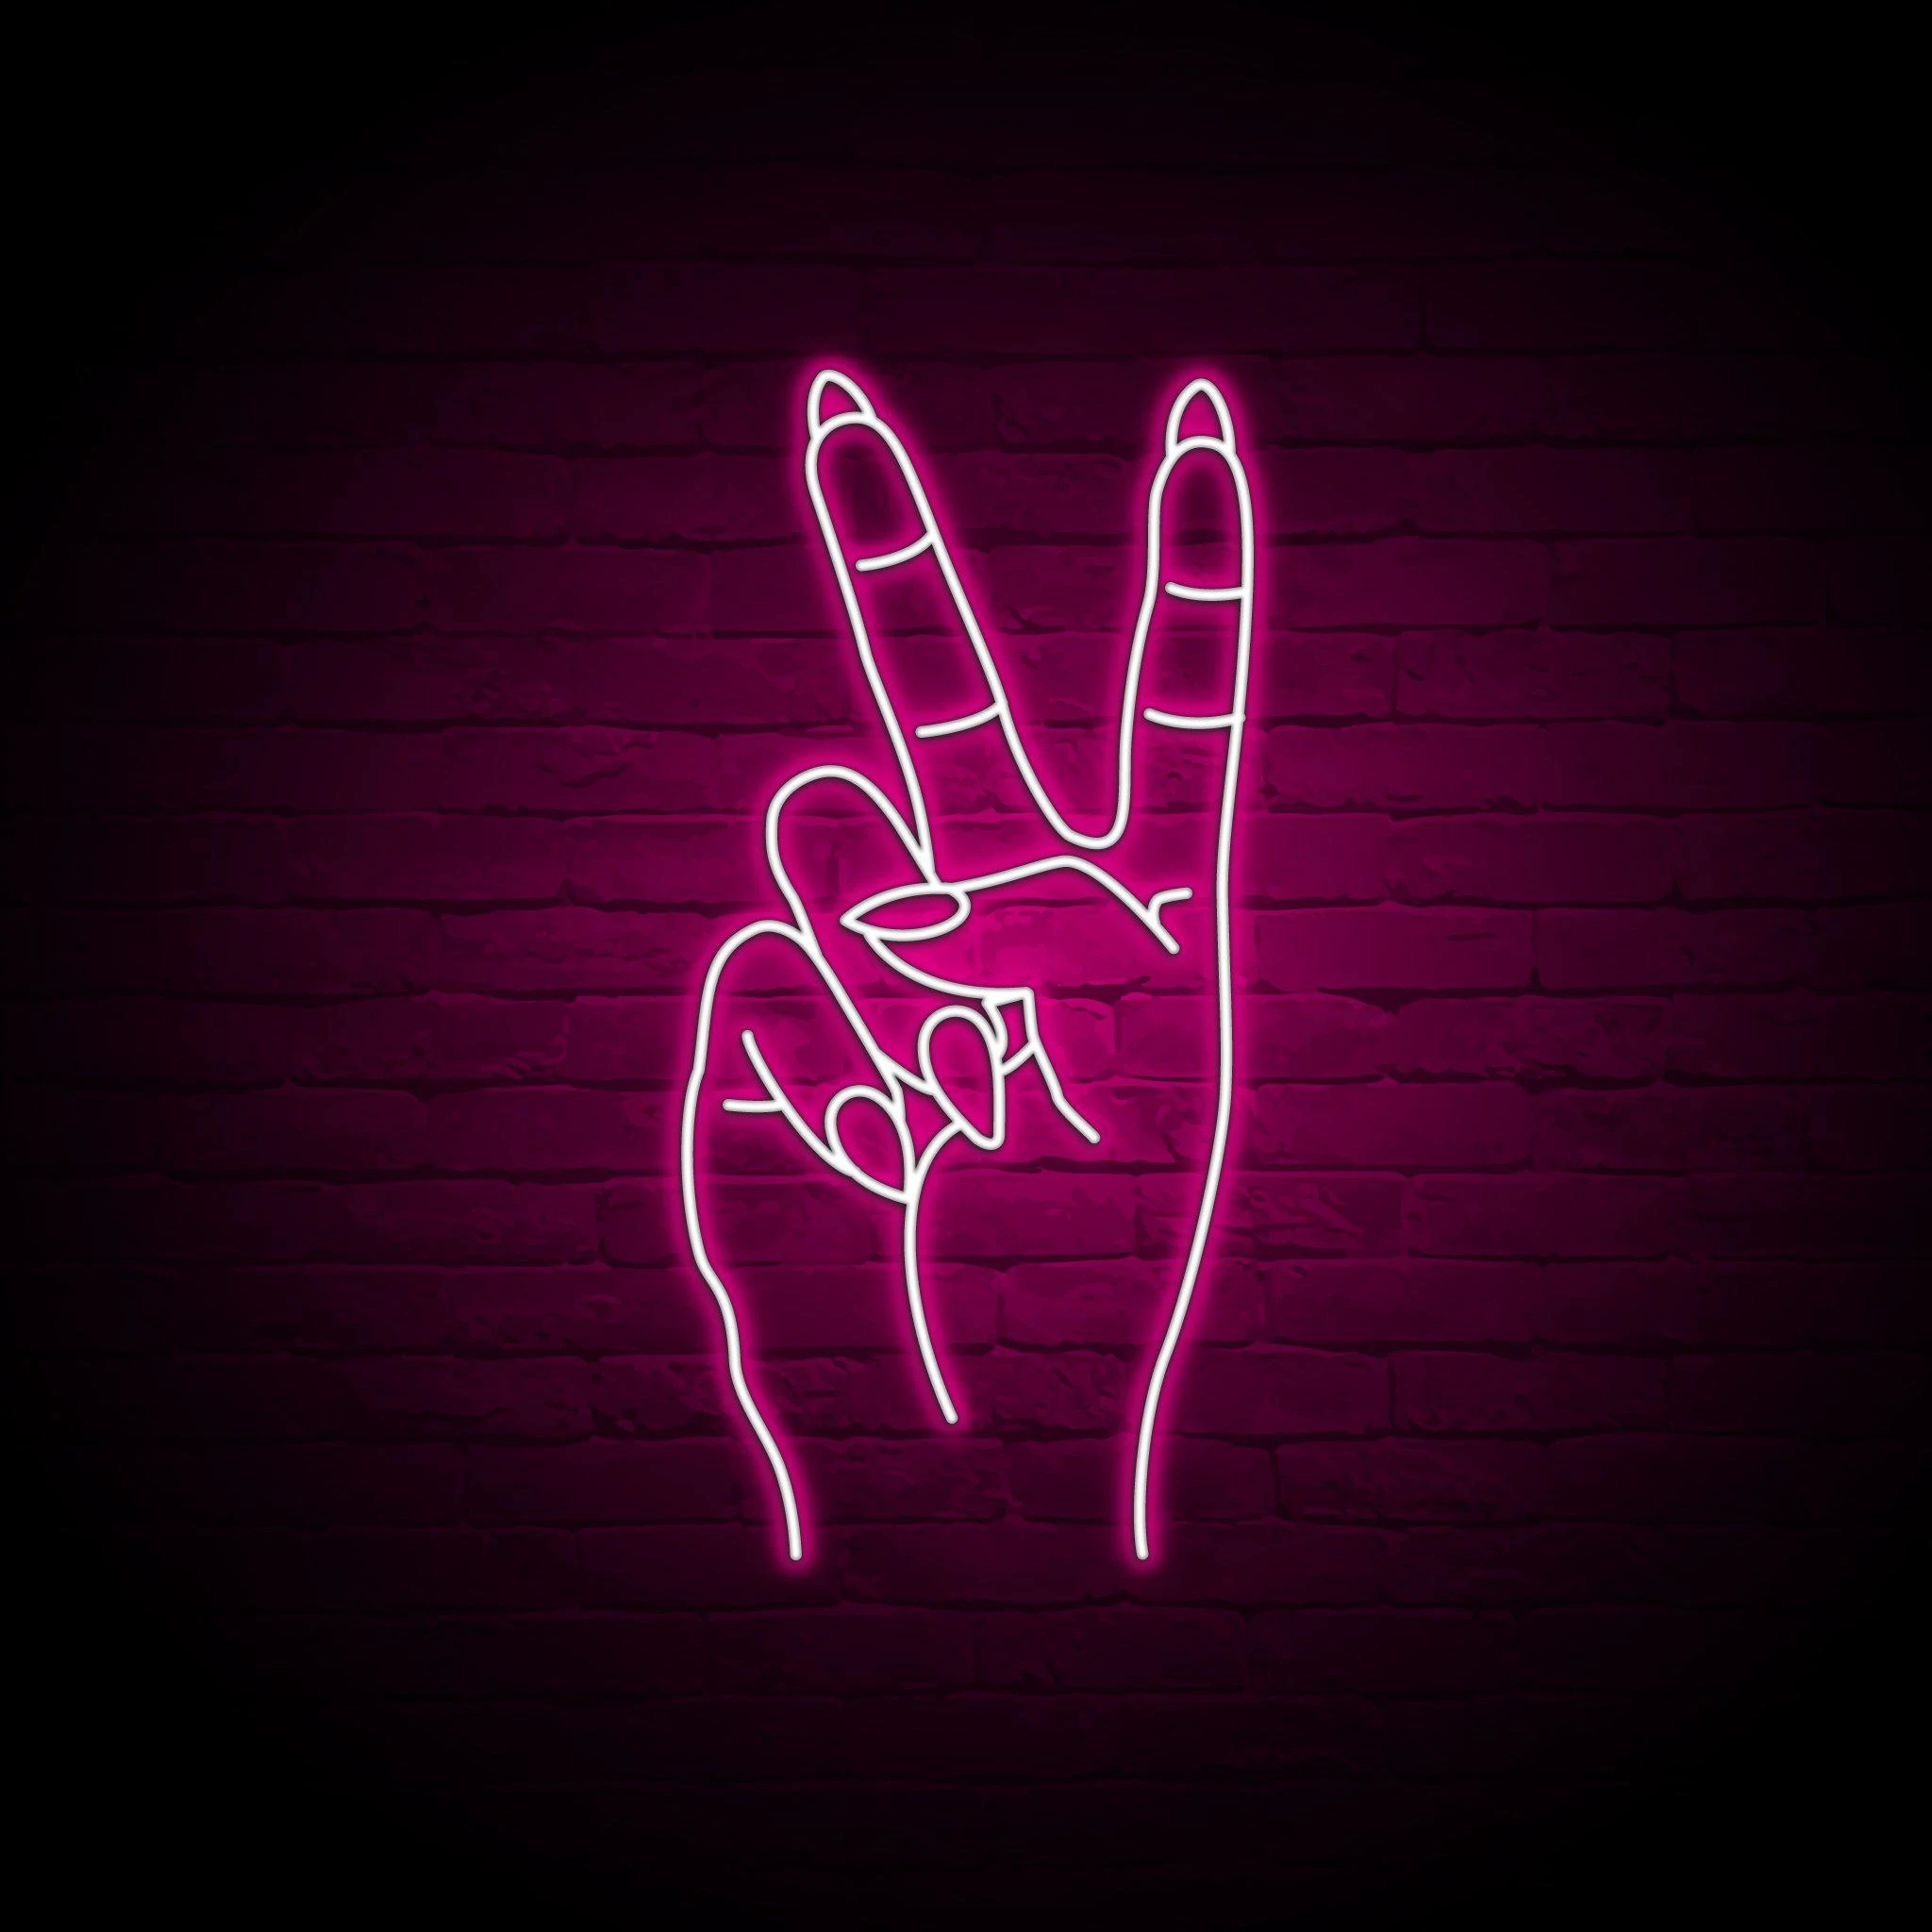 'PEACE FINGERS' NEON SIGN - NeonFerry